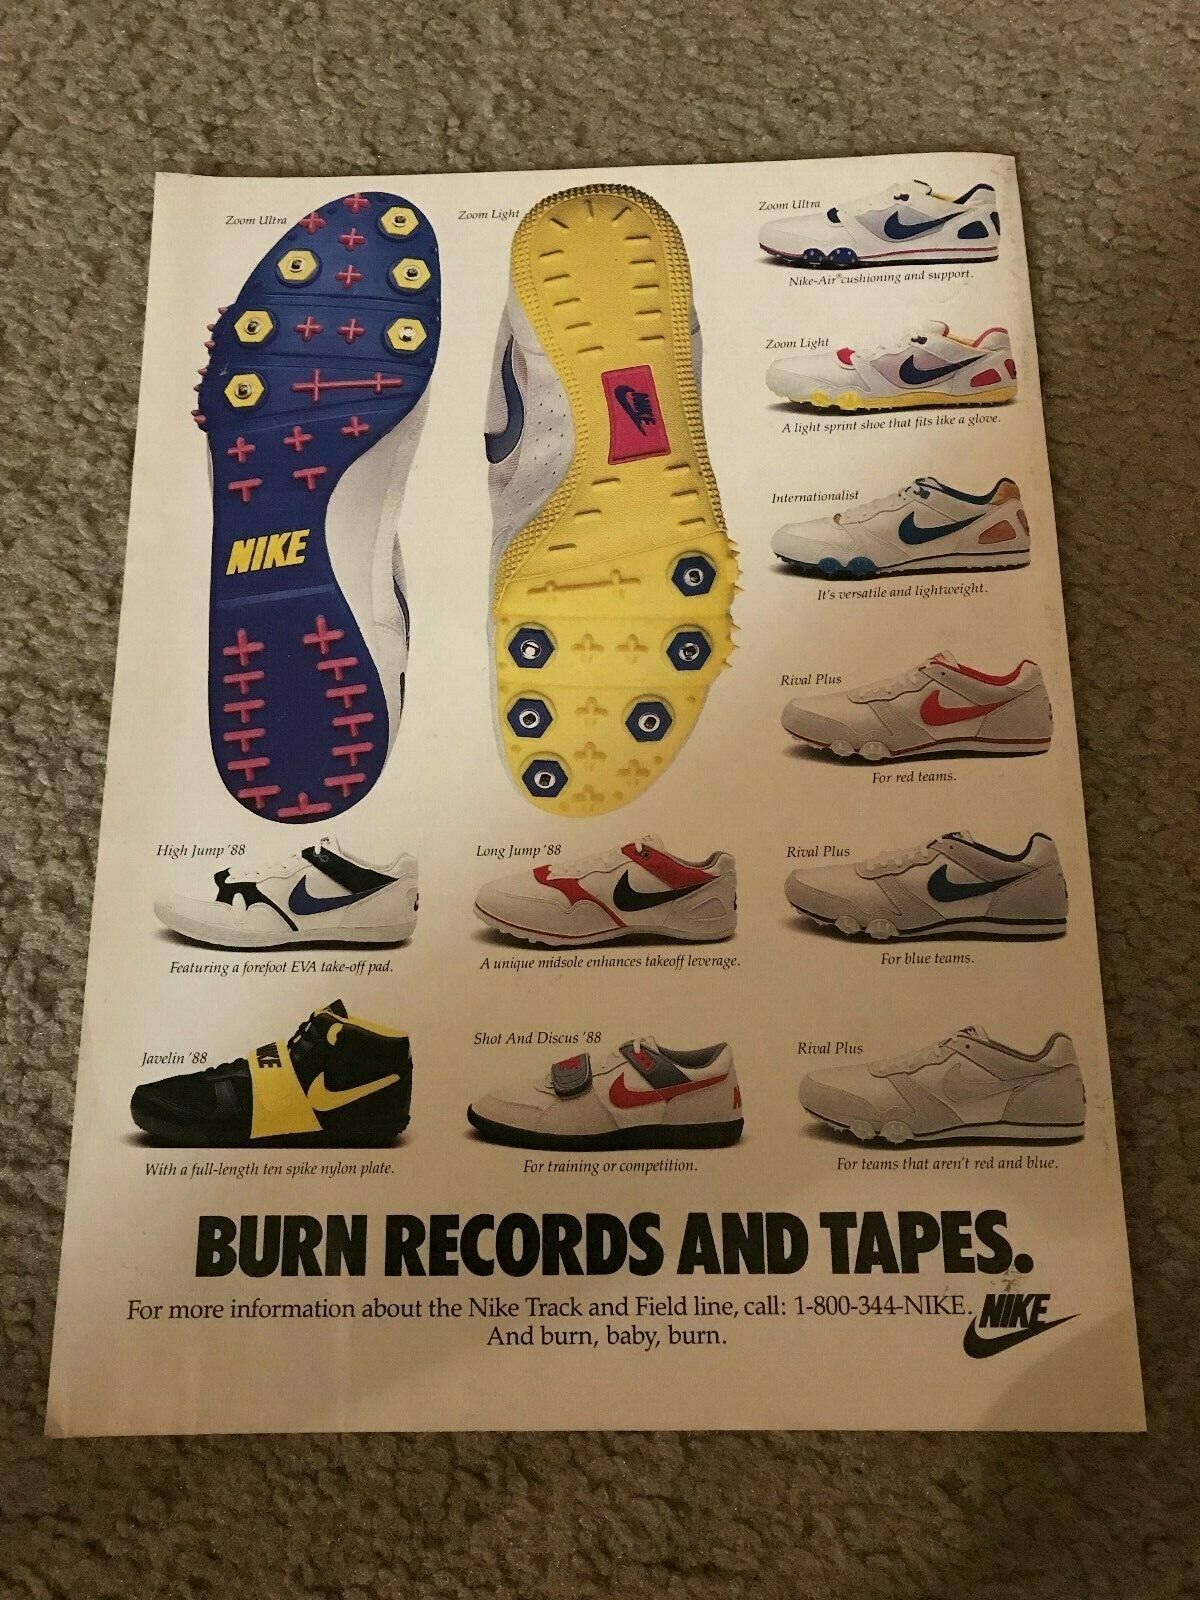 1980s NIKE Shoes Poster Print Ad ZOOM ULTRA LIGHT INTERNATIONALIST RIVAL PLUS